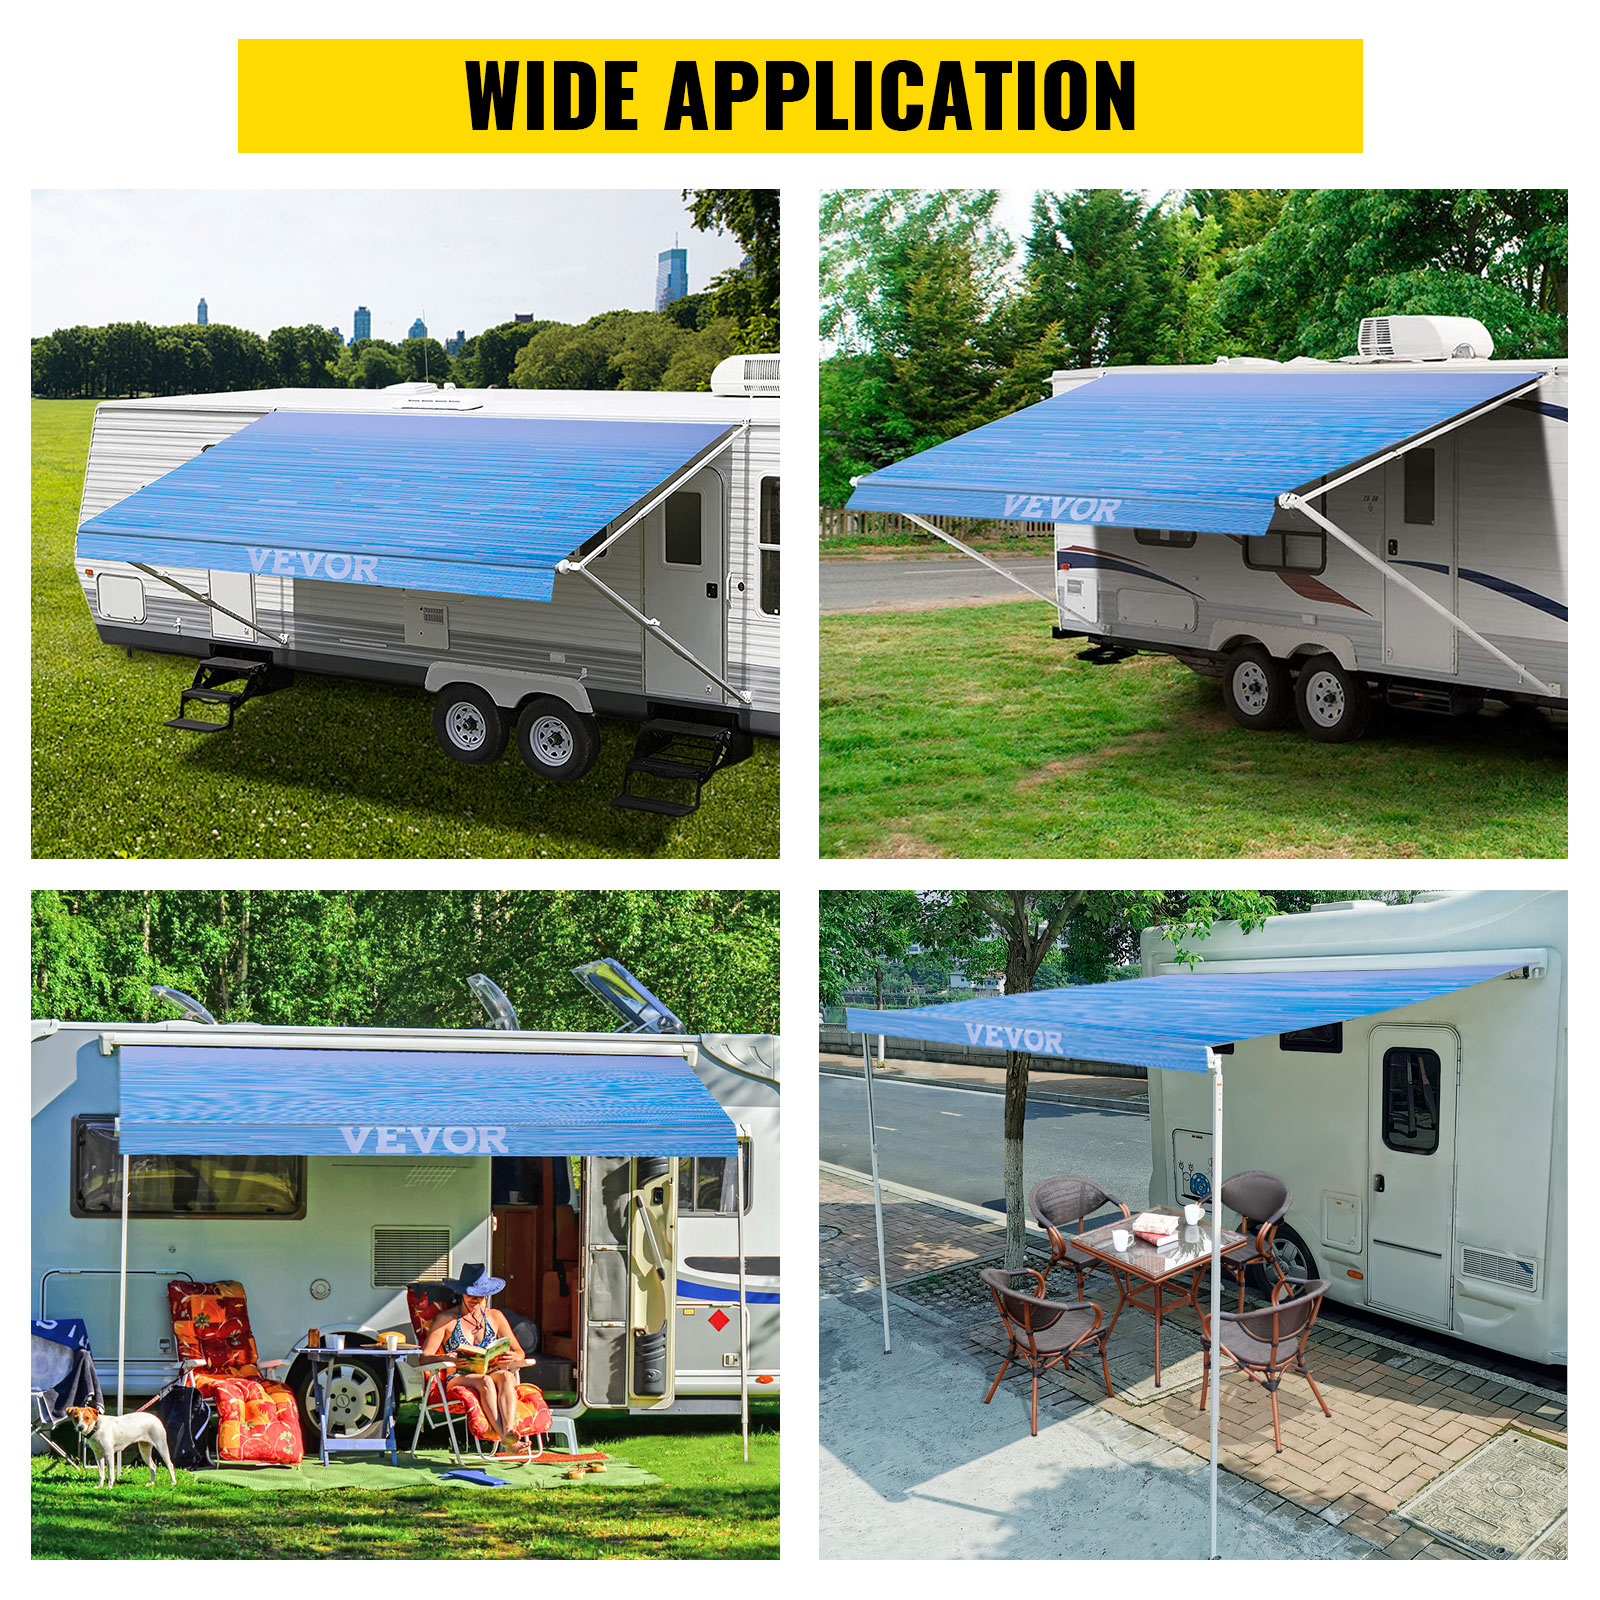 VEVOR RV Awning 19' Camper Awning Fabric, Trailer Awning Canopy Patio  Camping Car Awning, Durable 15oz Vinyl Roller Tube for RV, Van, SUV, Patio 